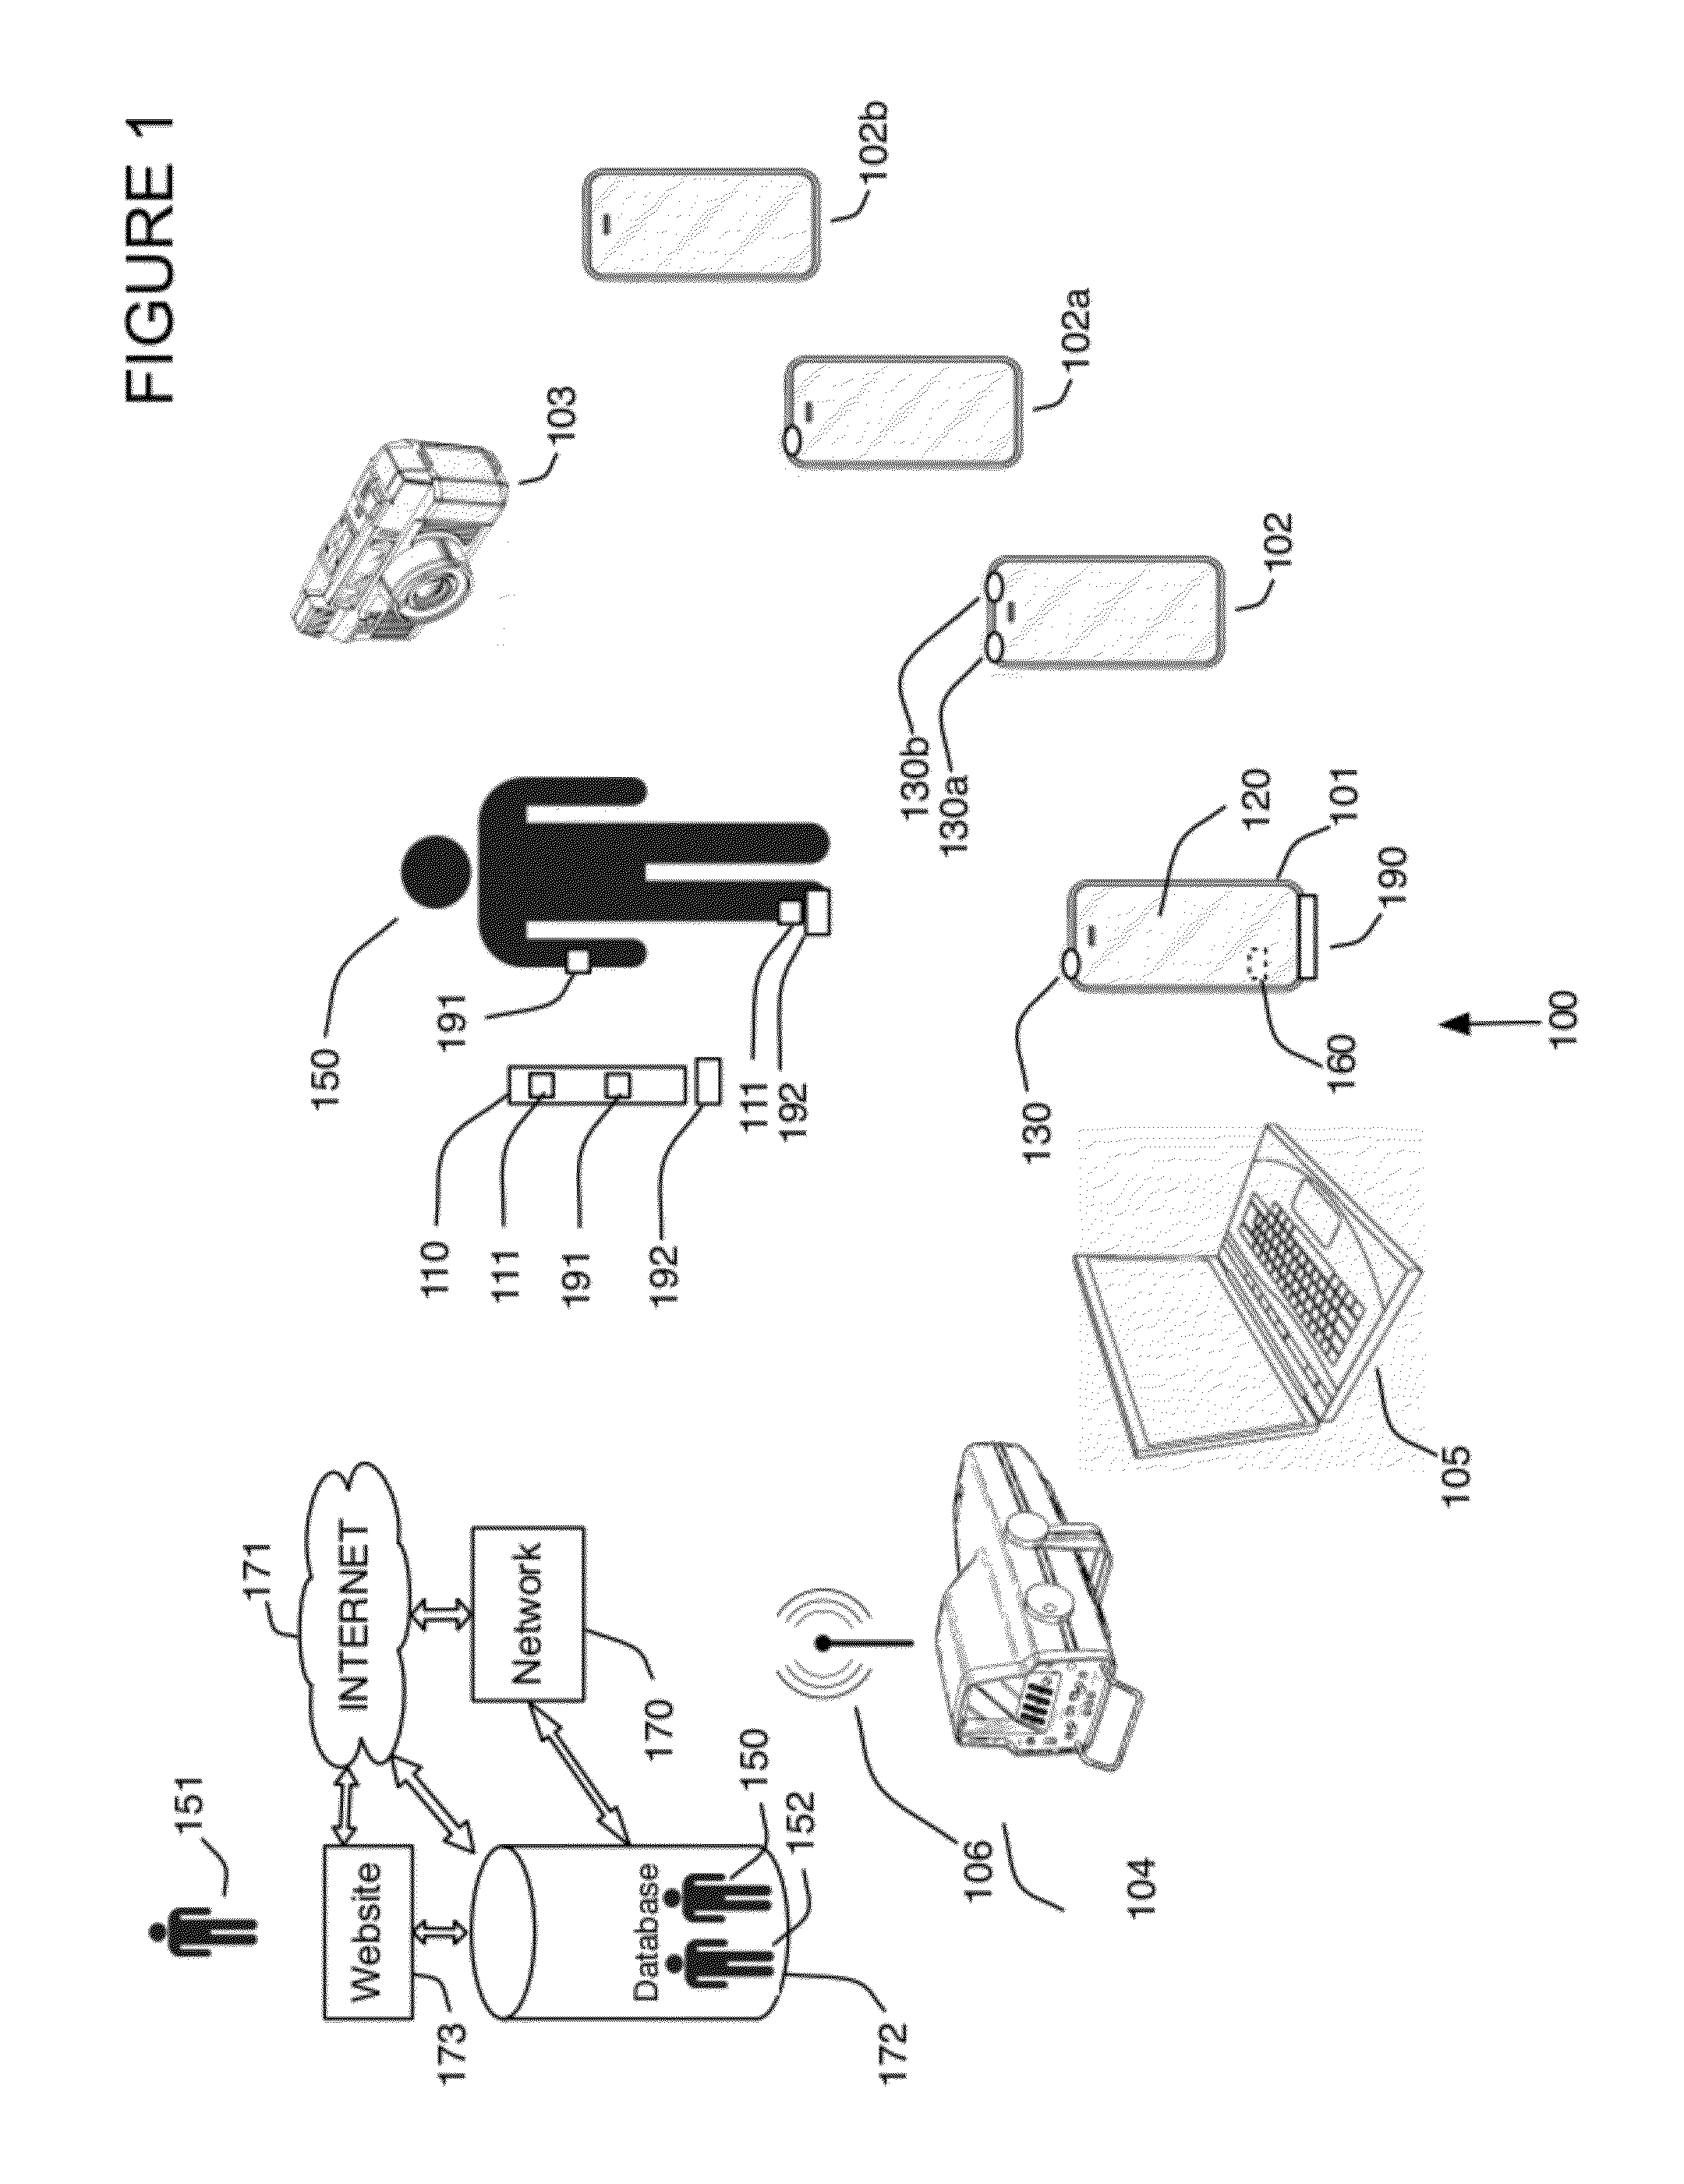 System and method for utilizing motion capture data